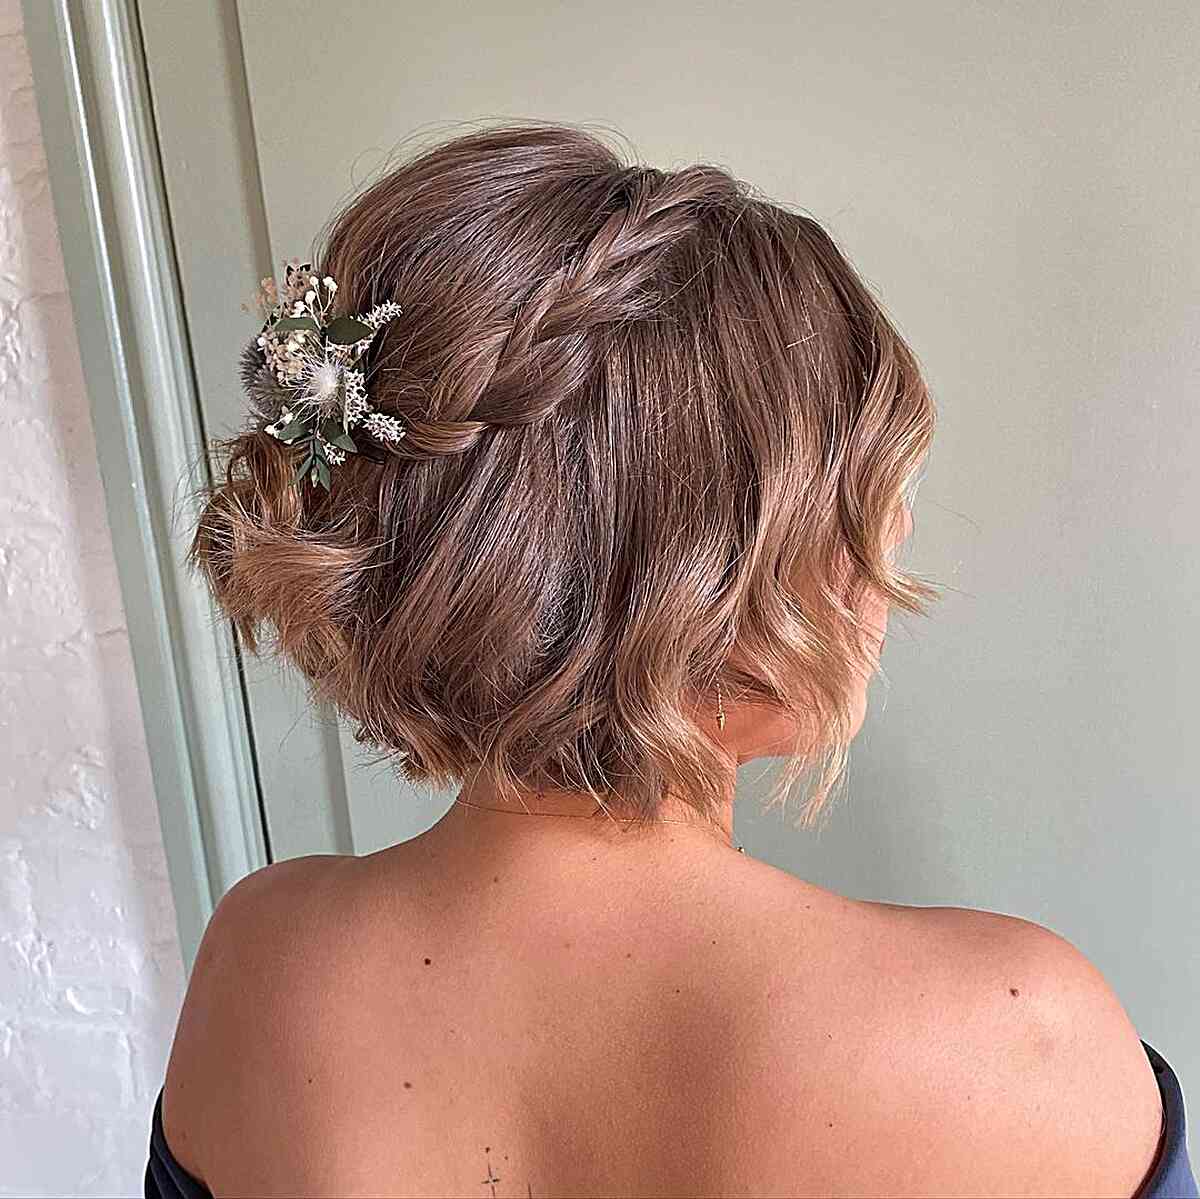 39 Popular Party Hairstyles That Are Easy to Style